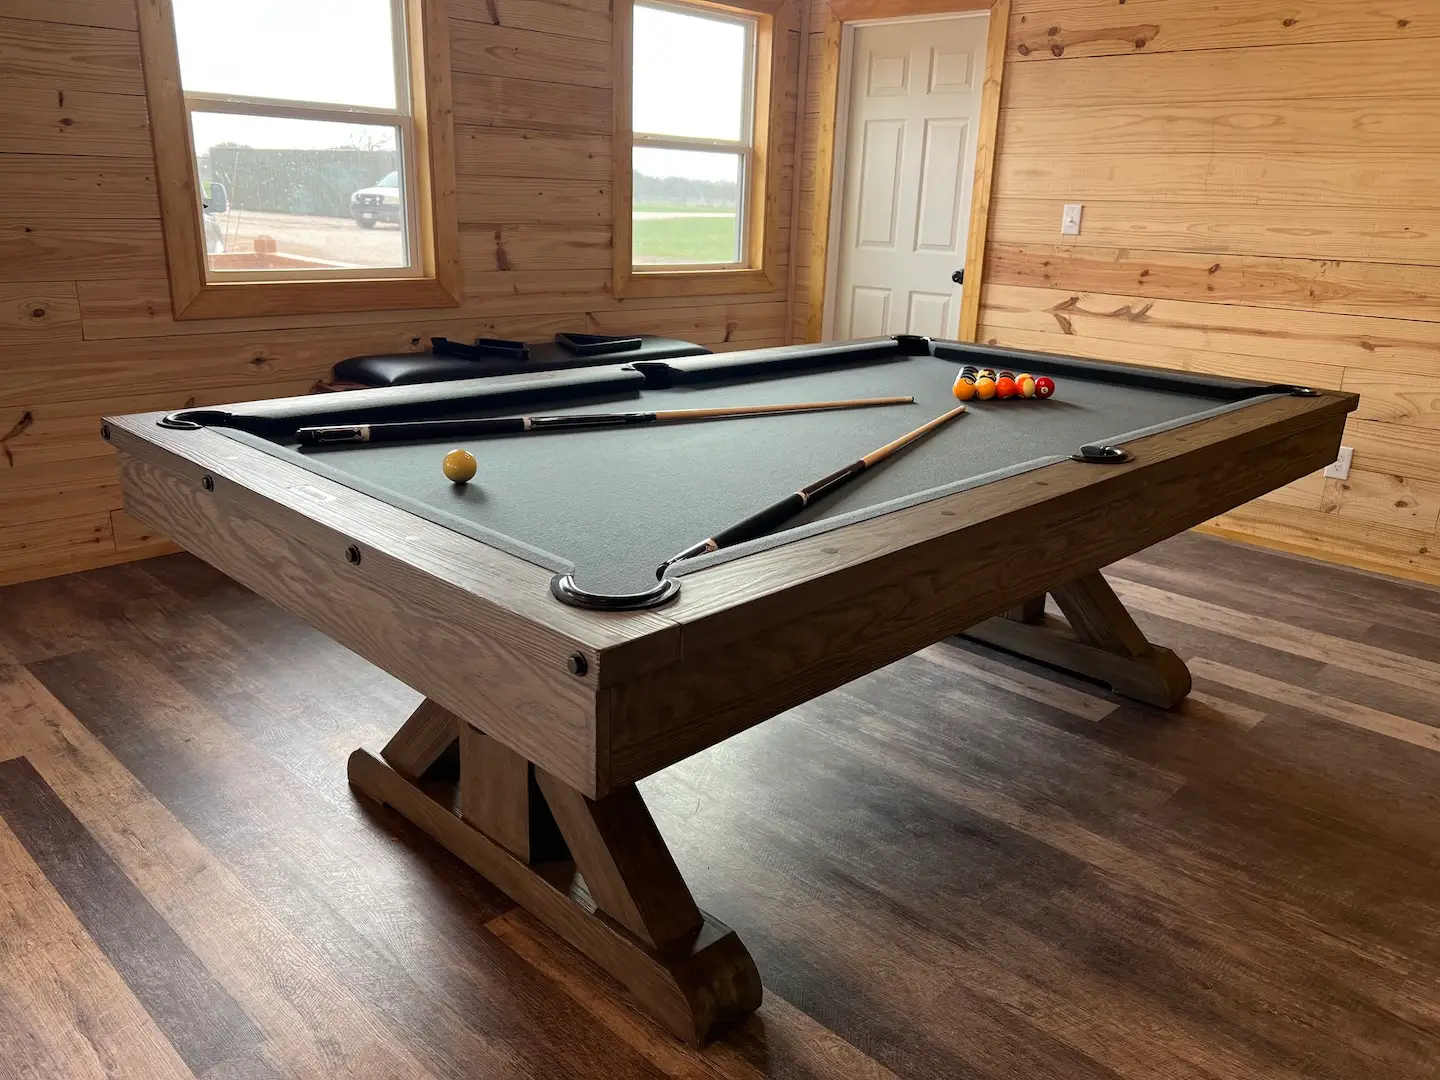 Pool table that has been professionally moved into a new home by Trooper Billiards.